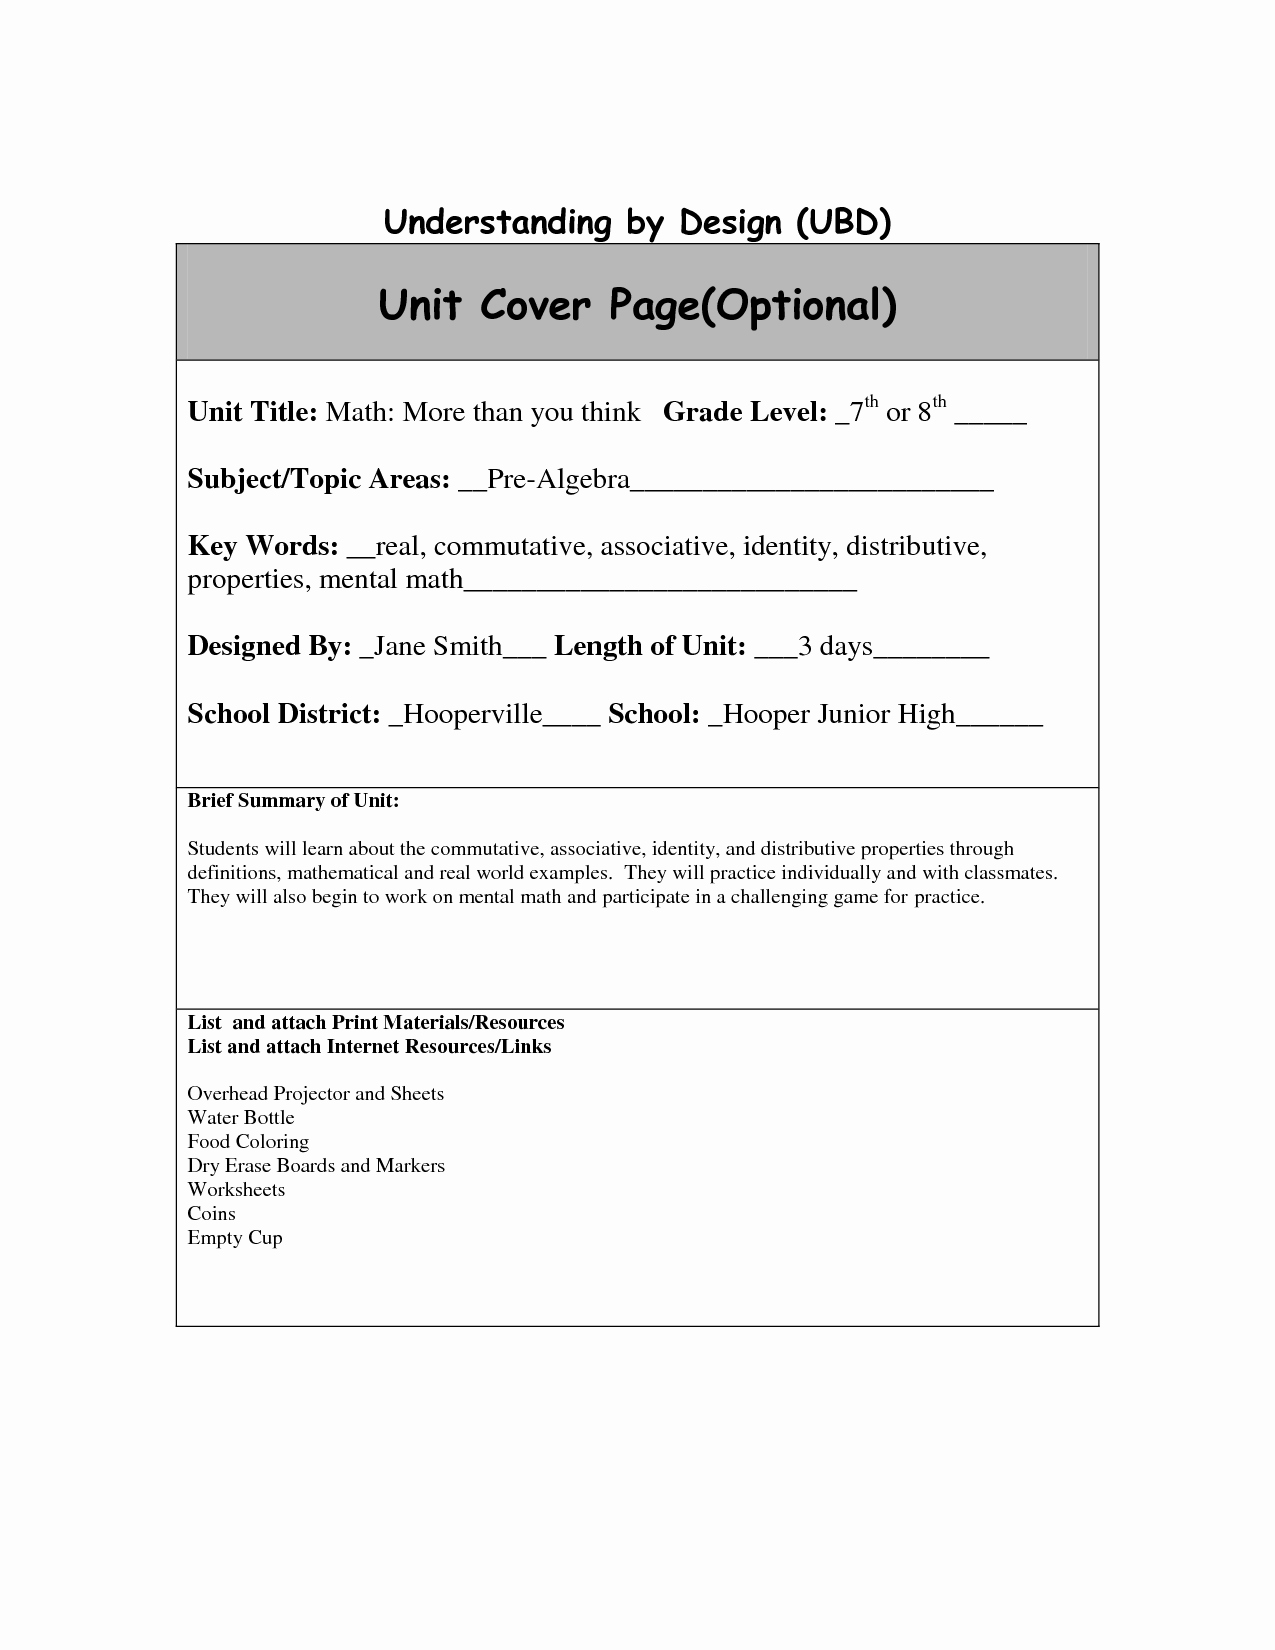 Respecting Others Property Worksheet Inspirational 15 Best Of Mental Health Resources and Worksheets